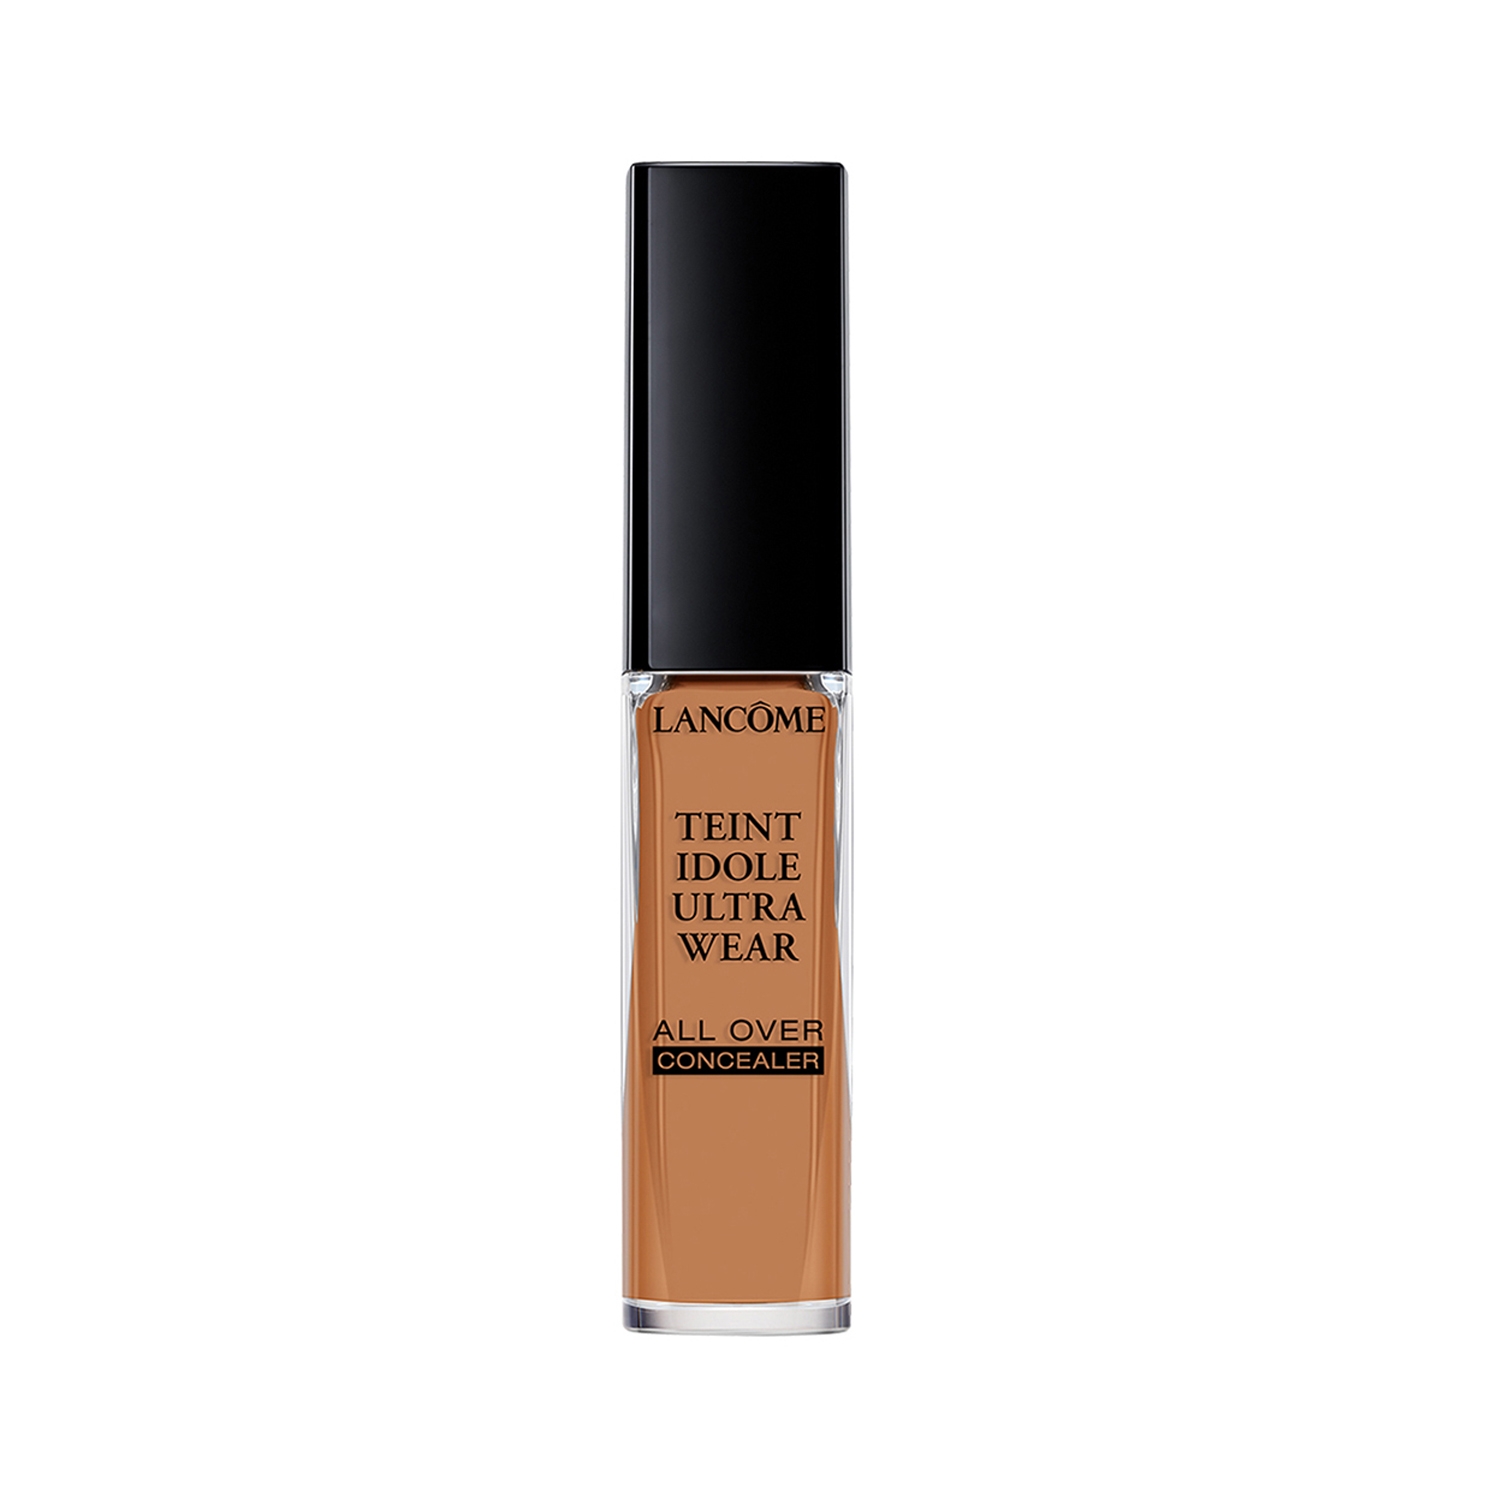 Lancome | Lancome Teint Idole Ultra Wear All Over Multi-Tasking Concealer - 09 Cookie-460 Suede W (13ml)